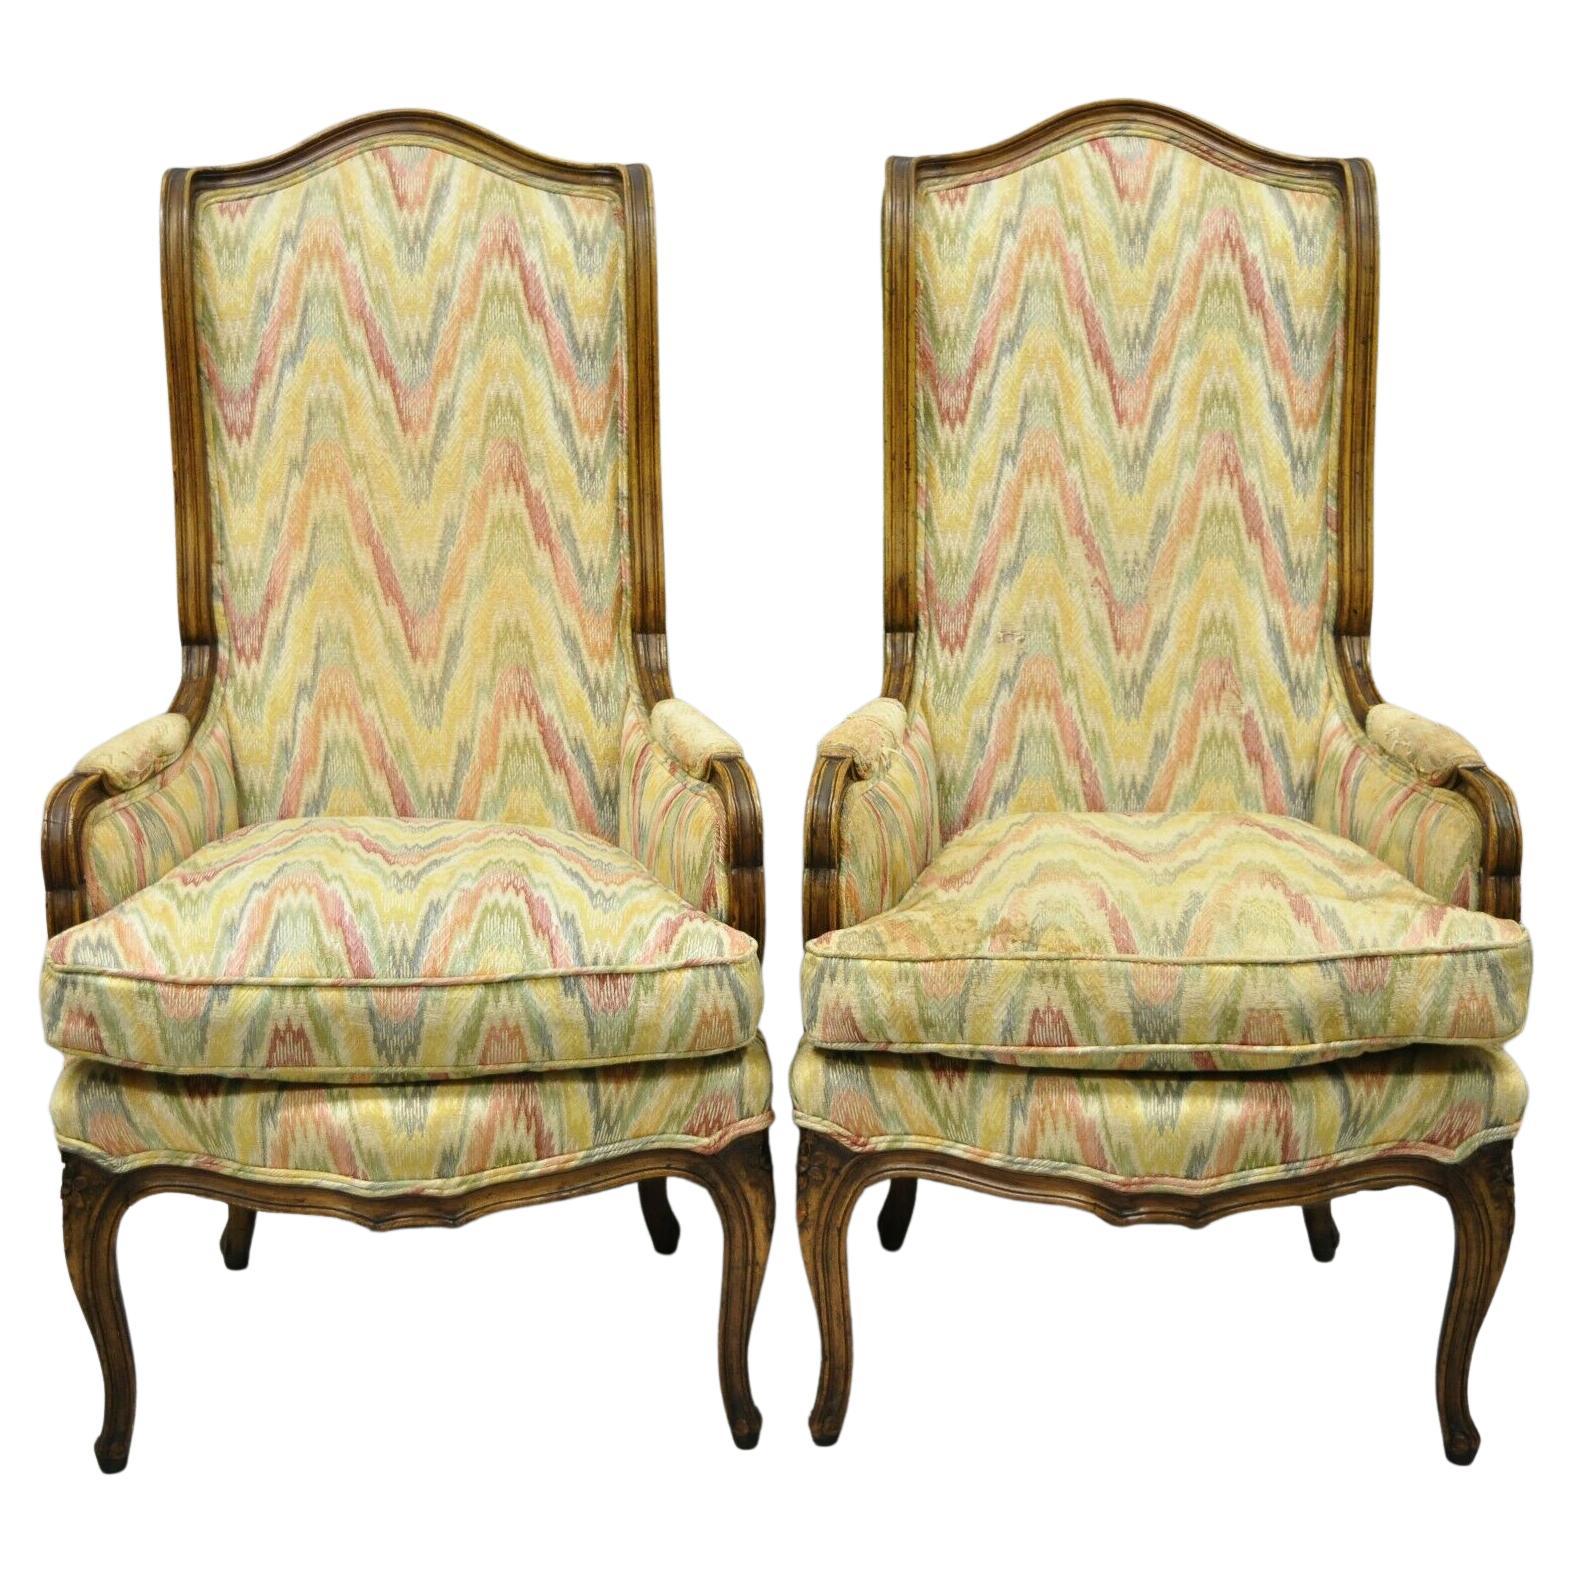 Vintage French Provincial Louis XV Country Narrow Tall Back Chairs 'B' - a Pair